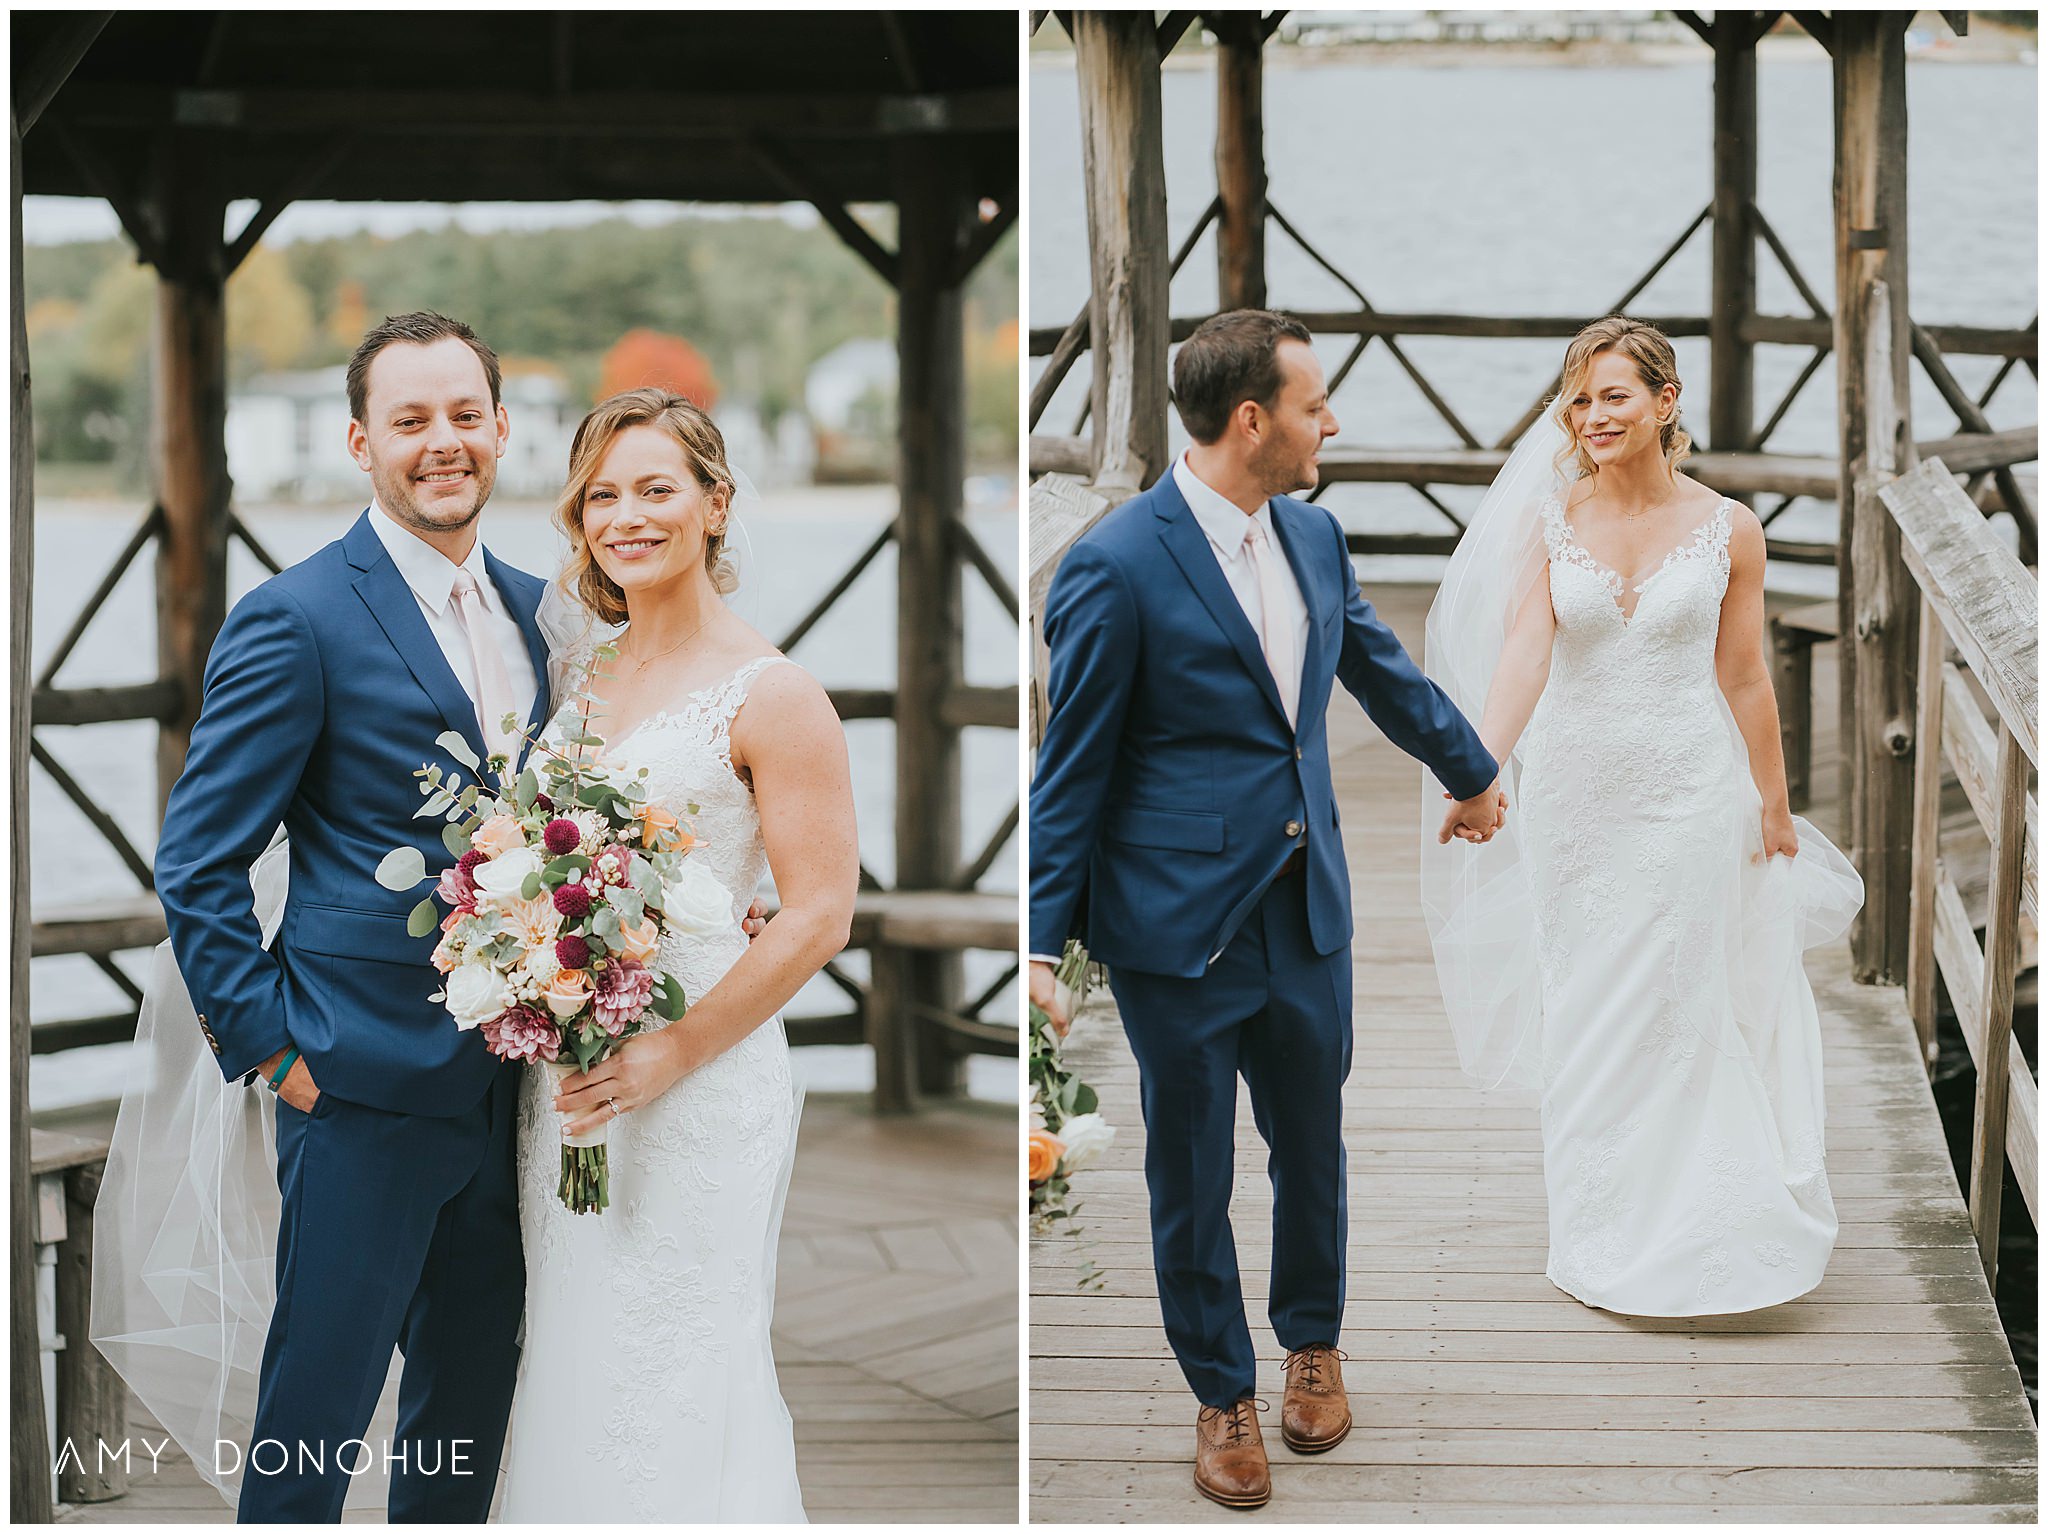 Bride and Groom Portraits New Hampshire Wedding Photographer | Church Landing at Mill Falls, New Hampshire | © Amy Donohue Photography